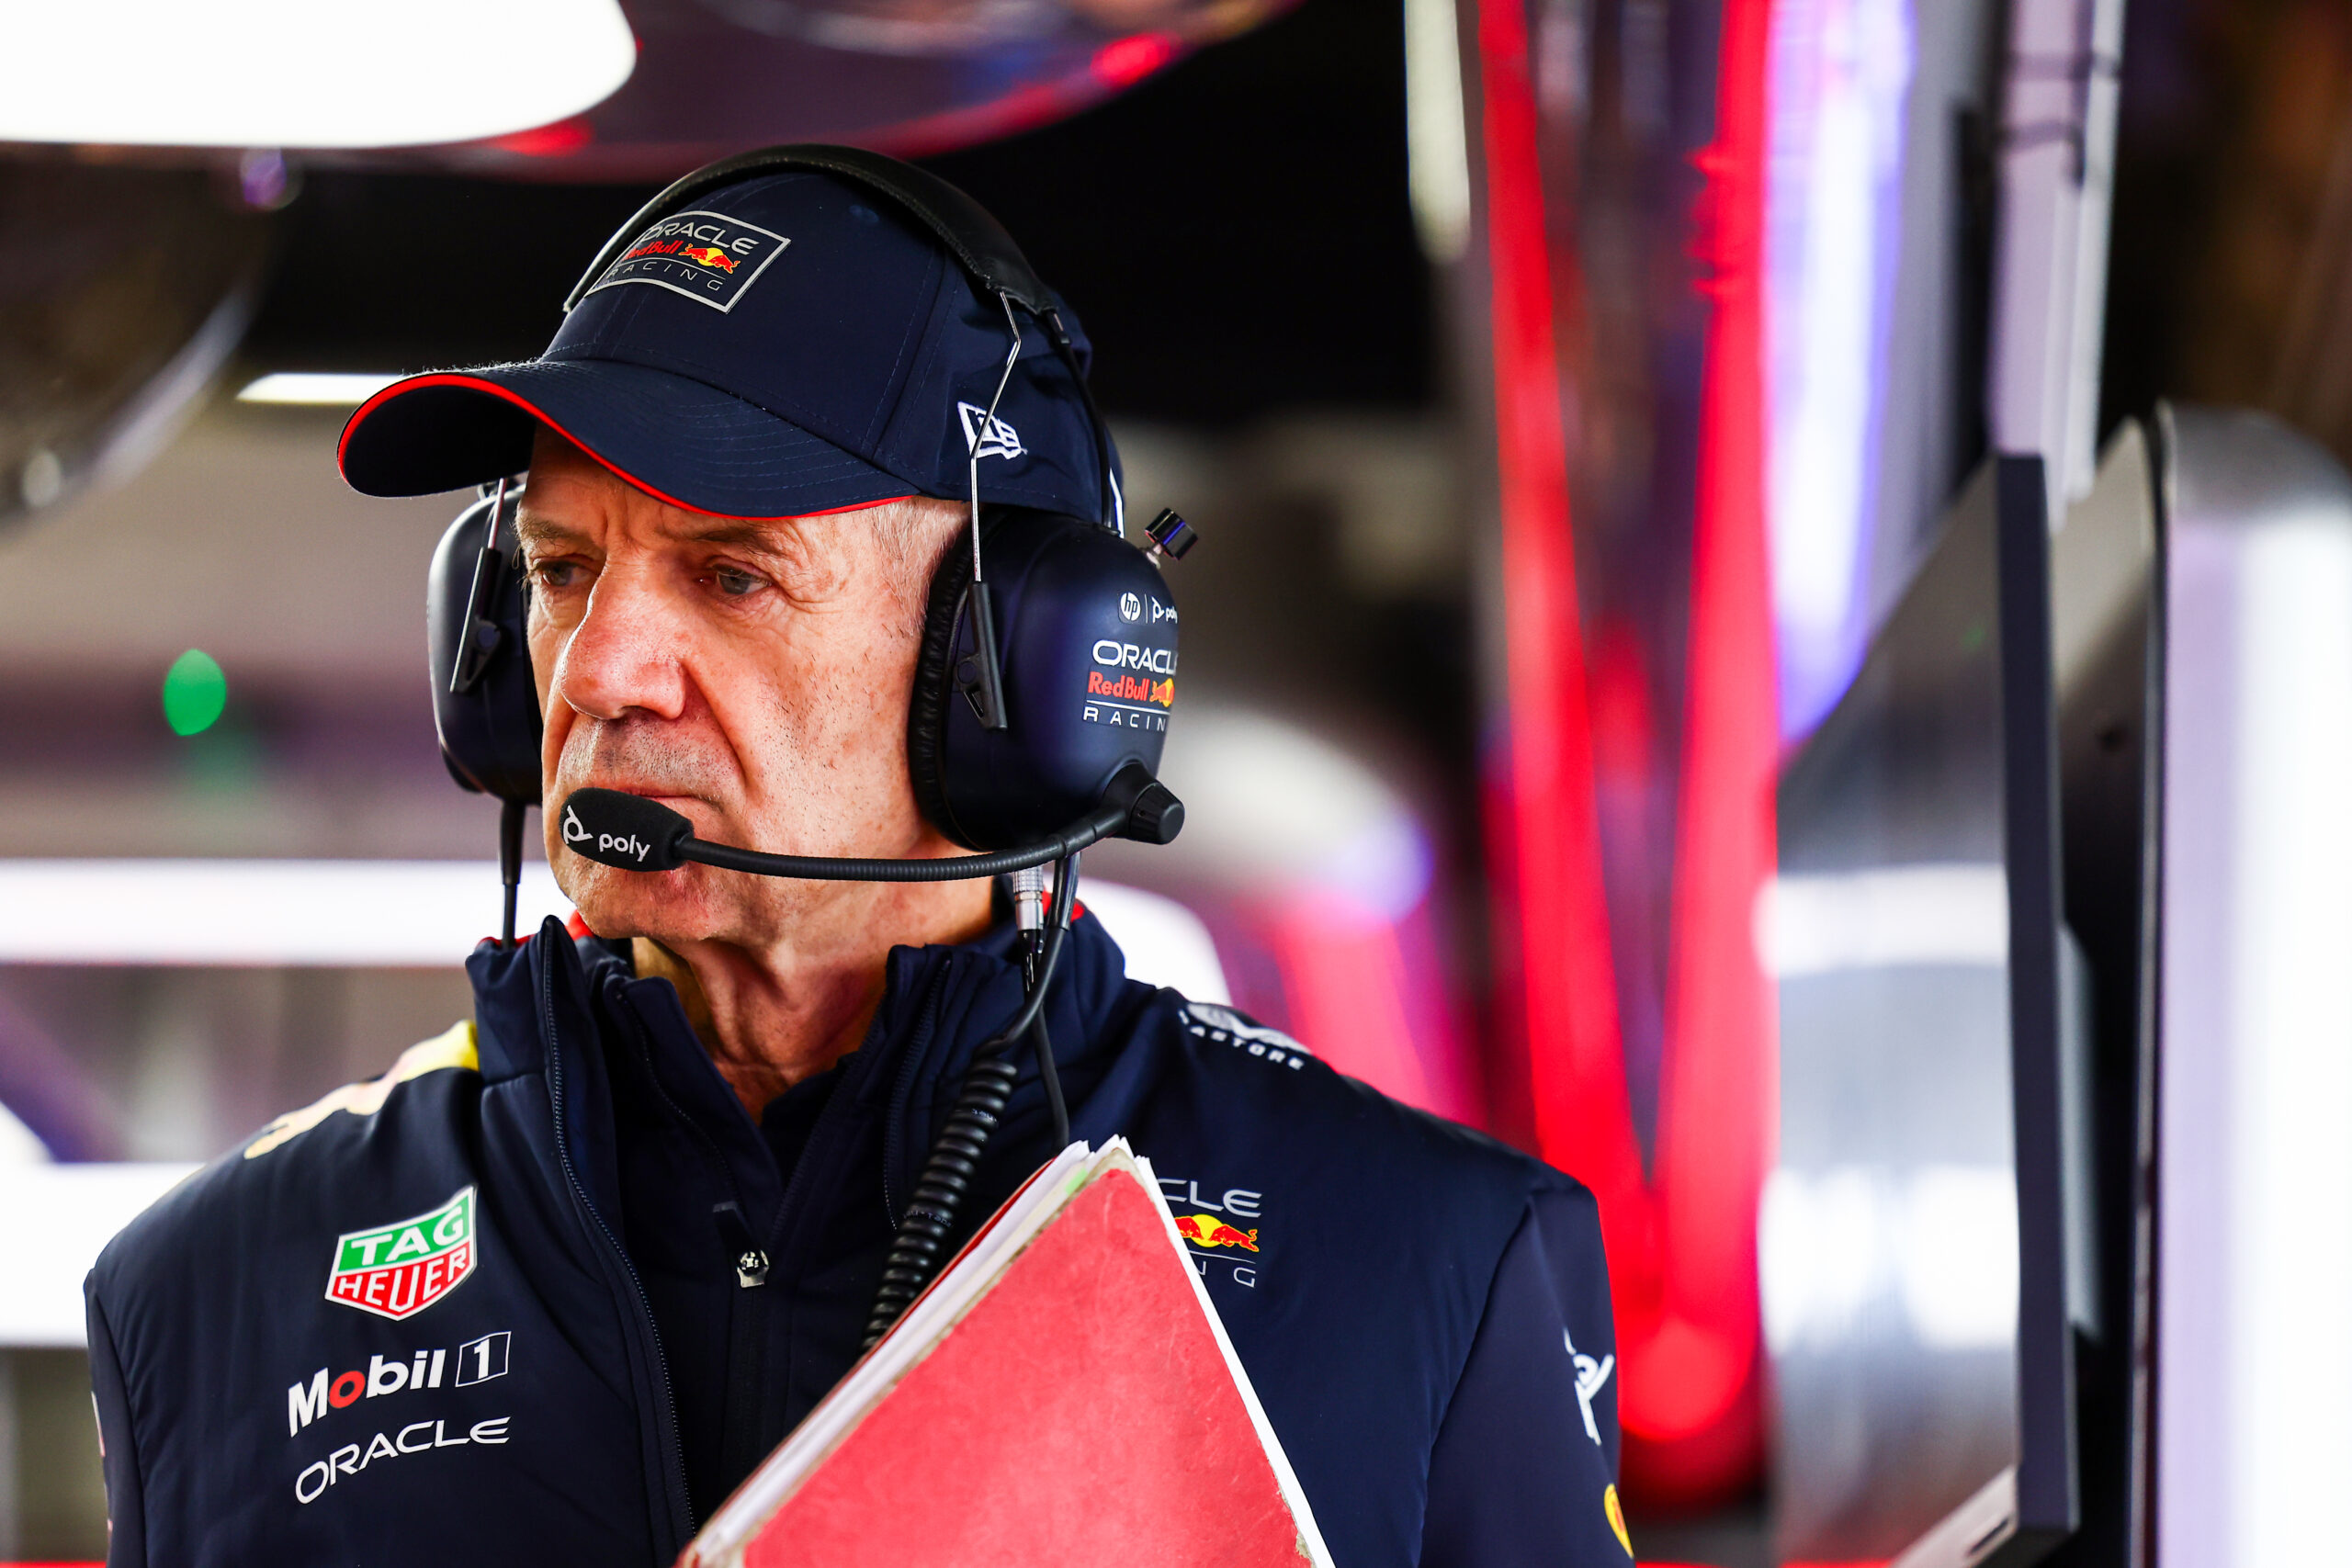 Confirmed: Adrian Newey Is Leaving Red Bull, with Destination Unknown